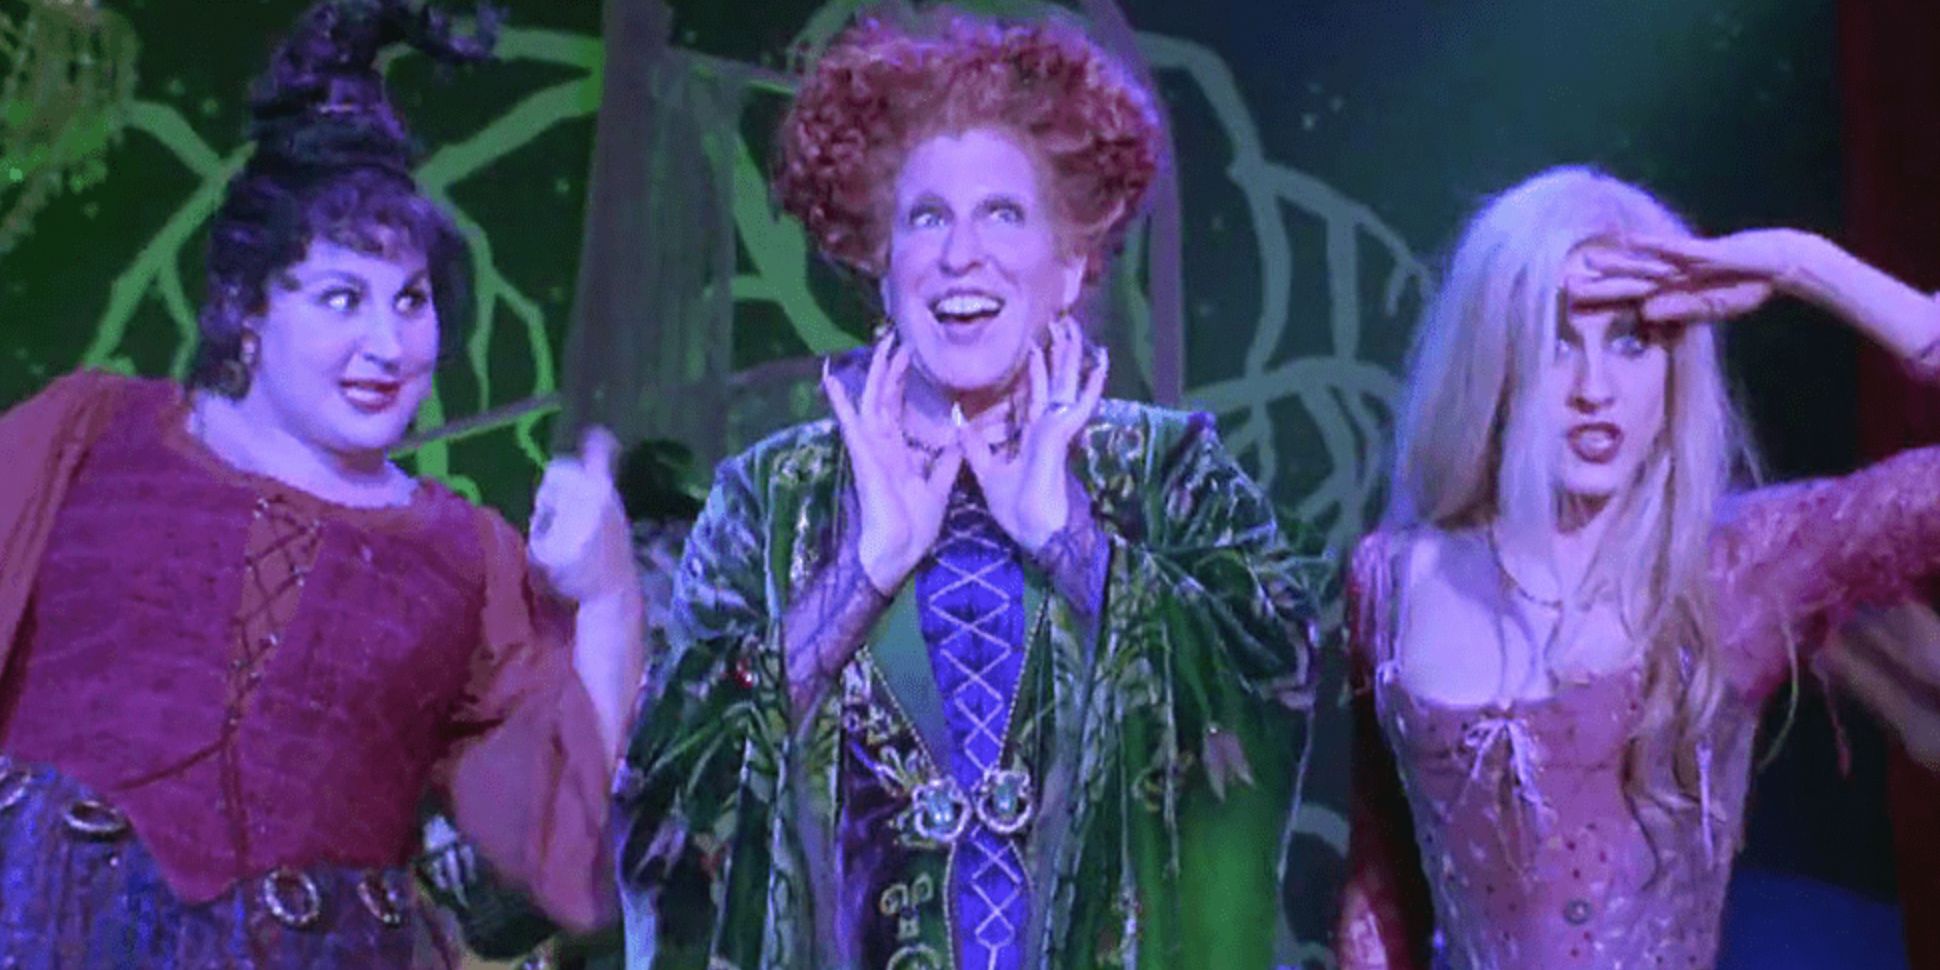 The Sanderson sisters perform on stage in Hocus Pocus